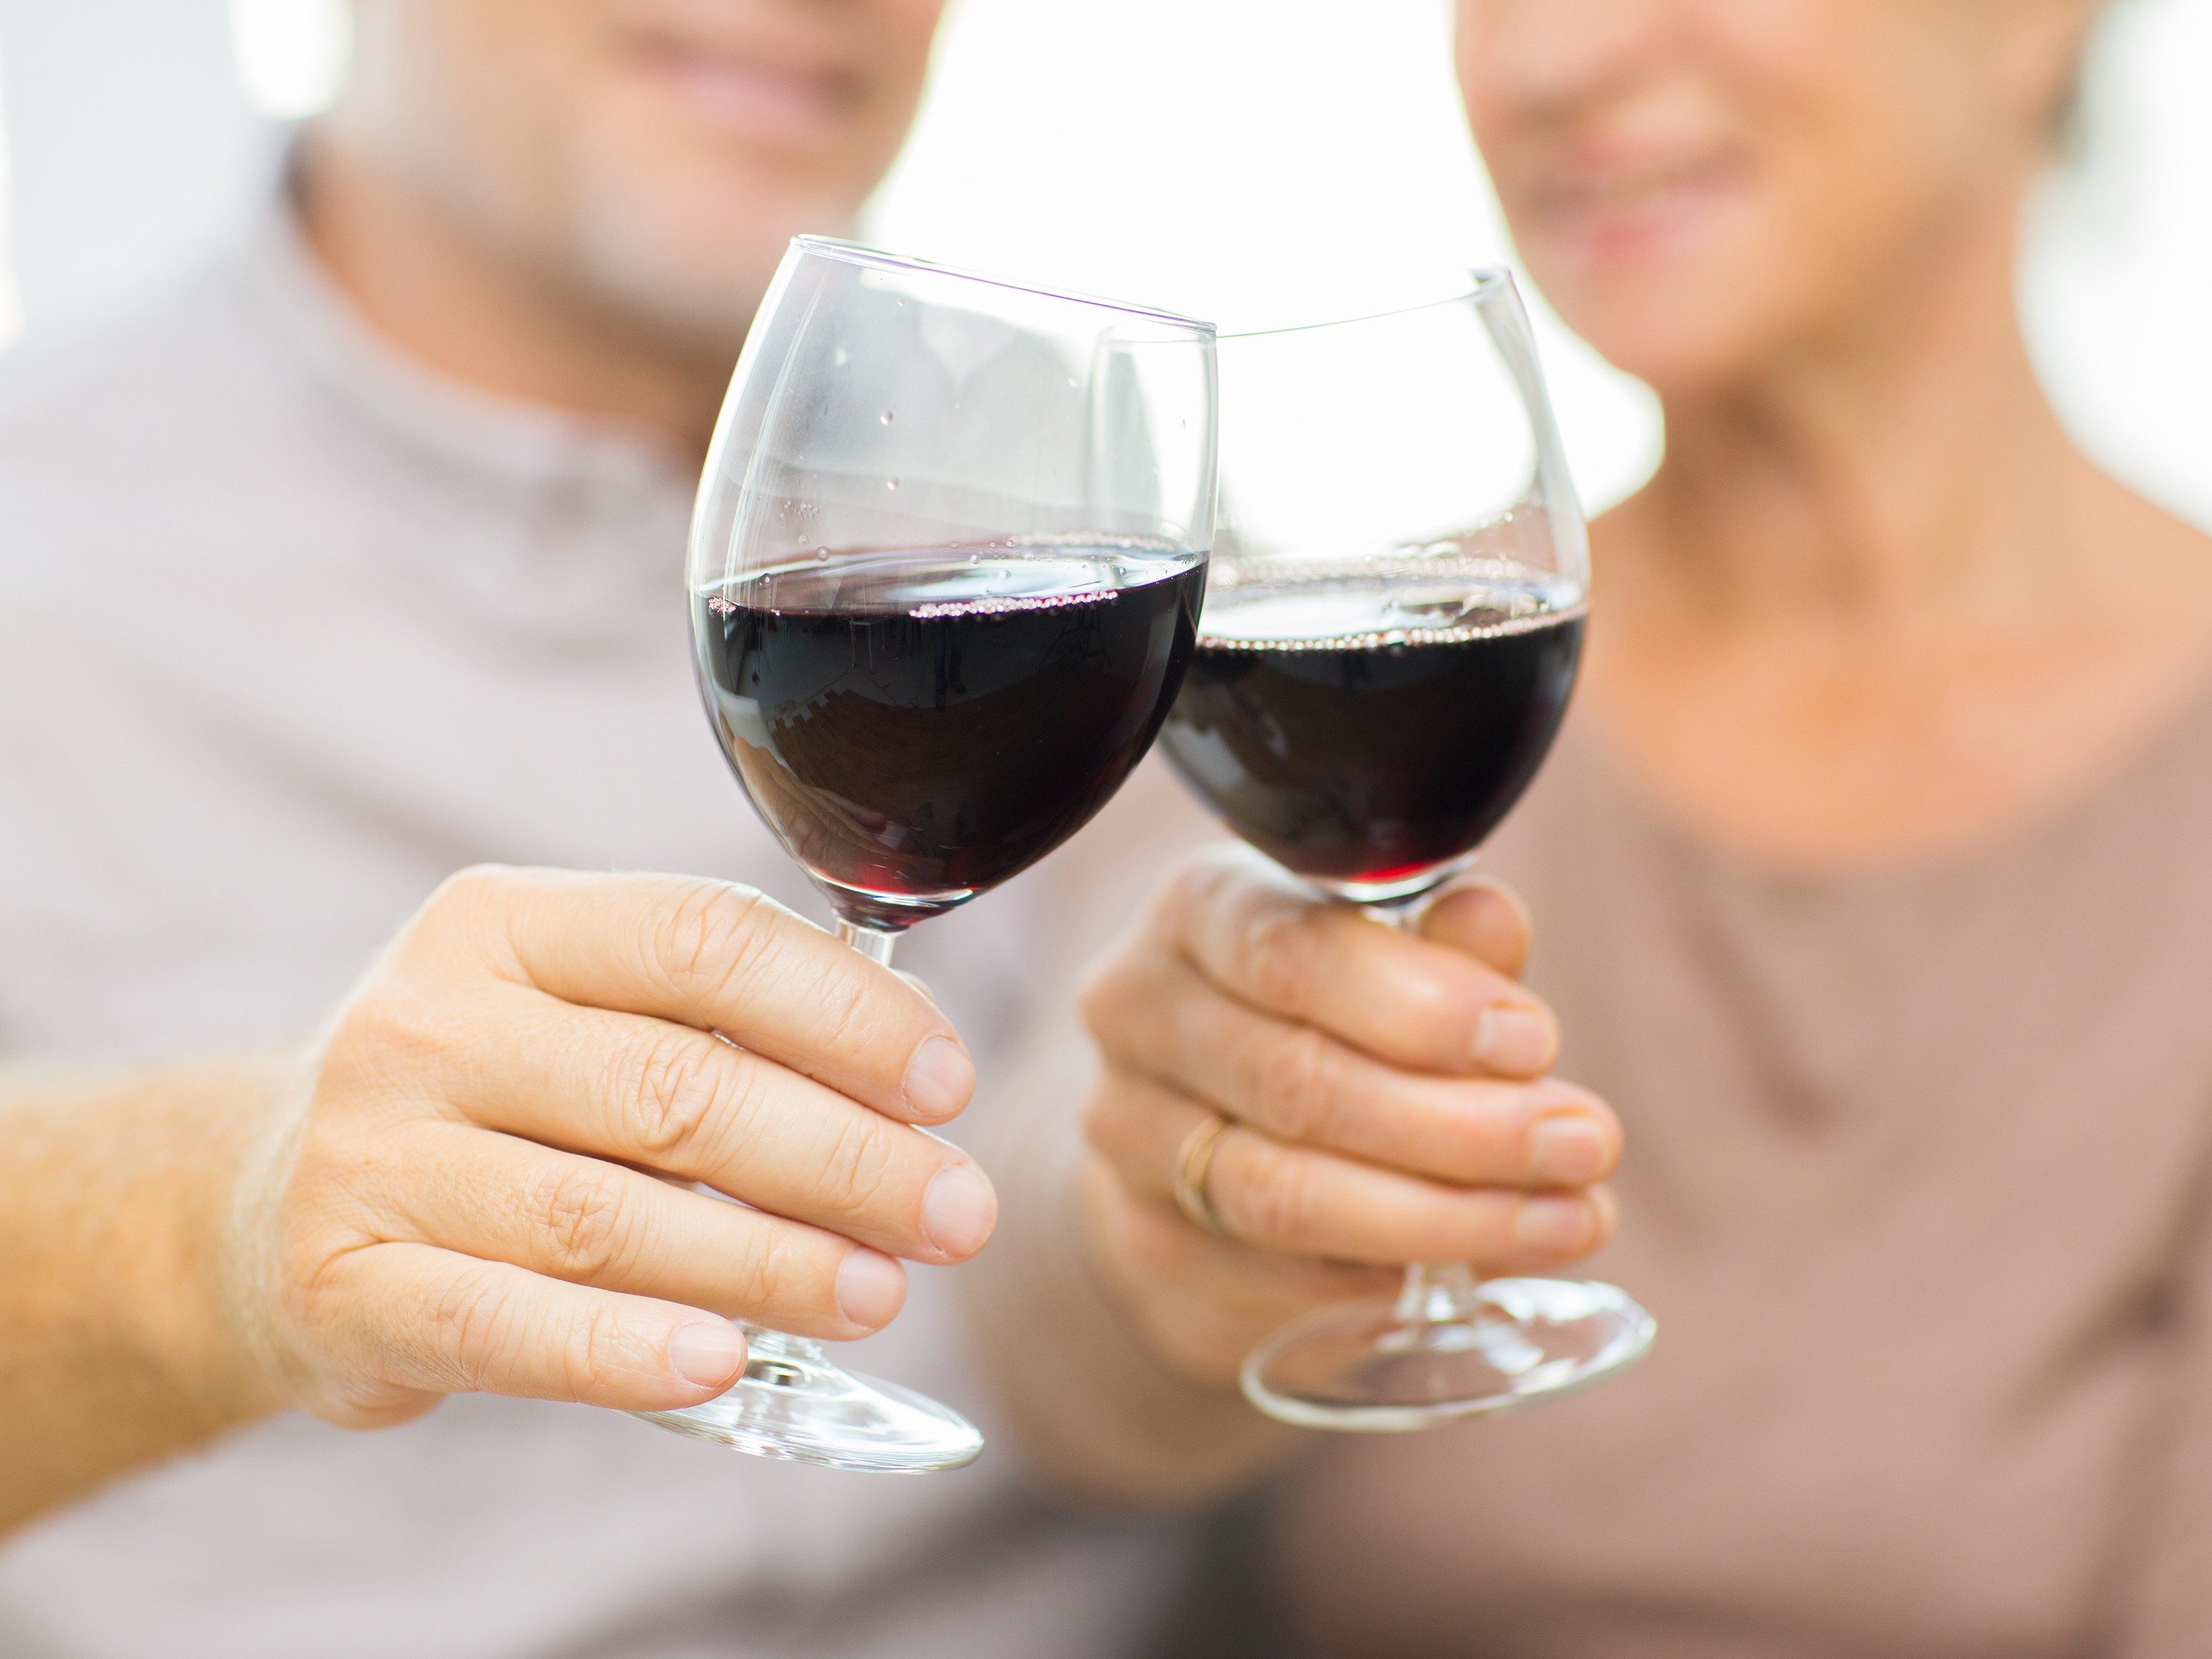 6. Prevent memory loss by reducing your alcohol consumption